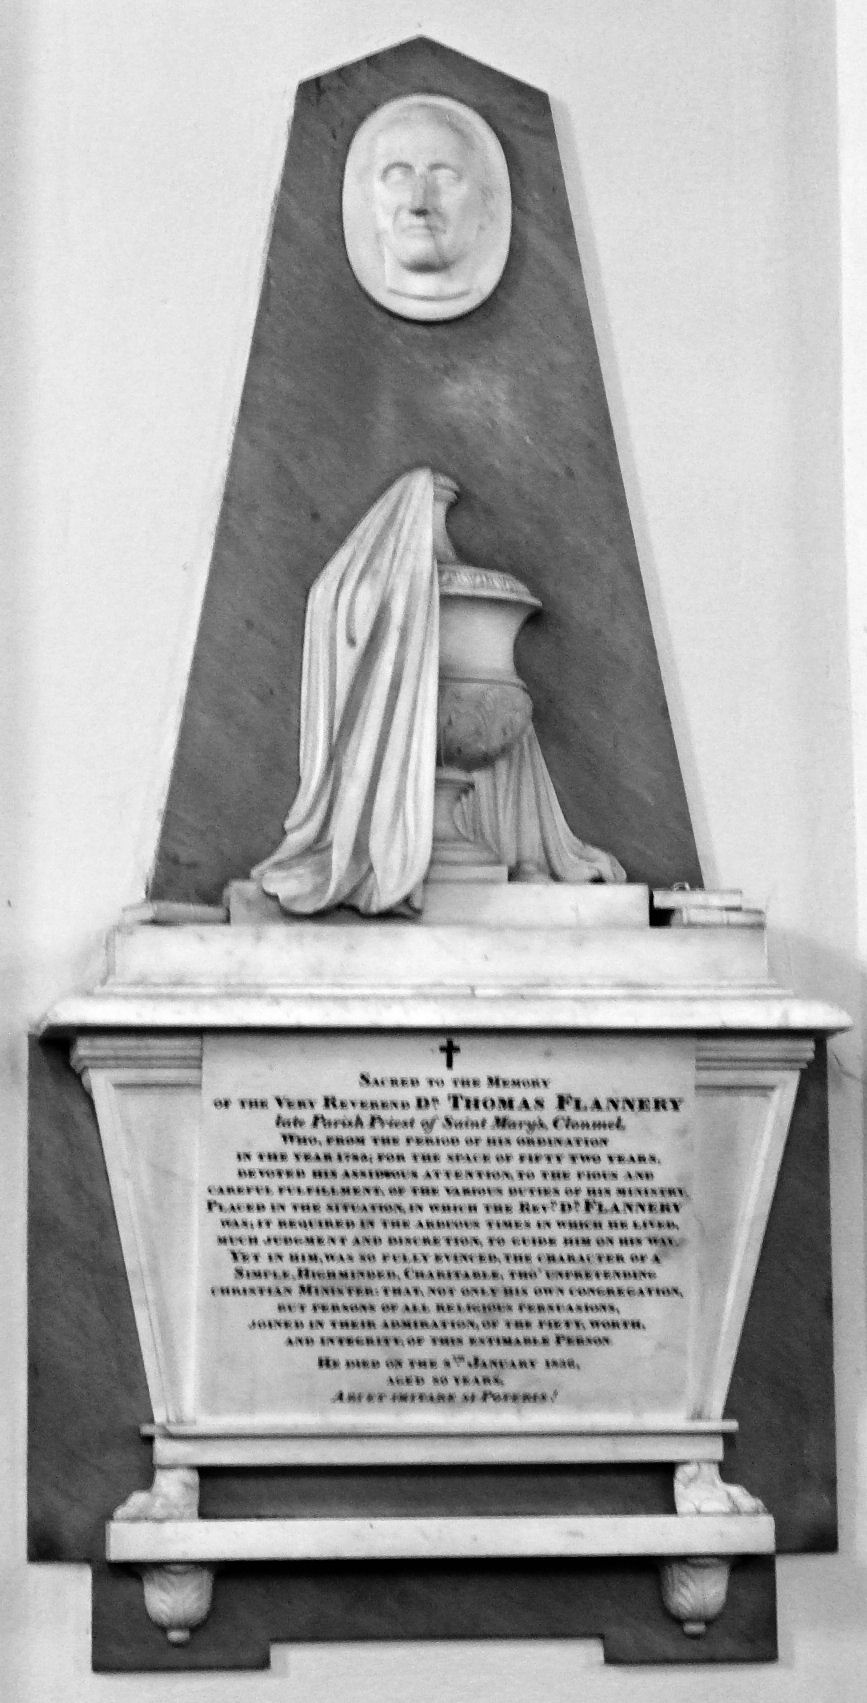 Memorial to Dr. Thomas Flannery in Saint Mary's Church